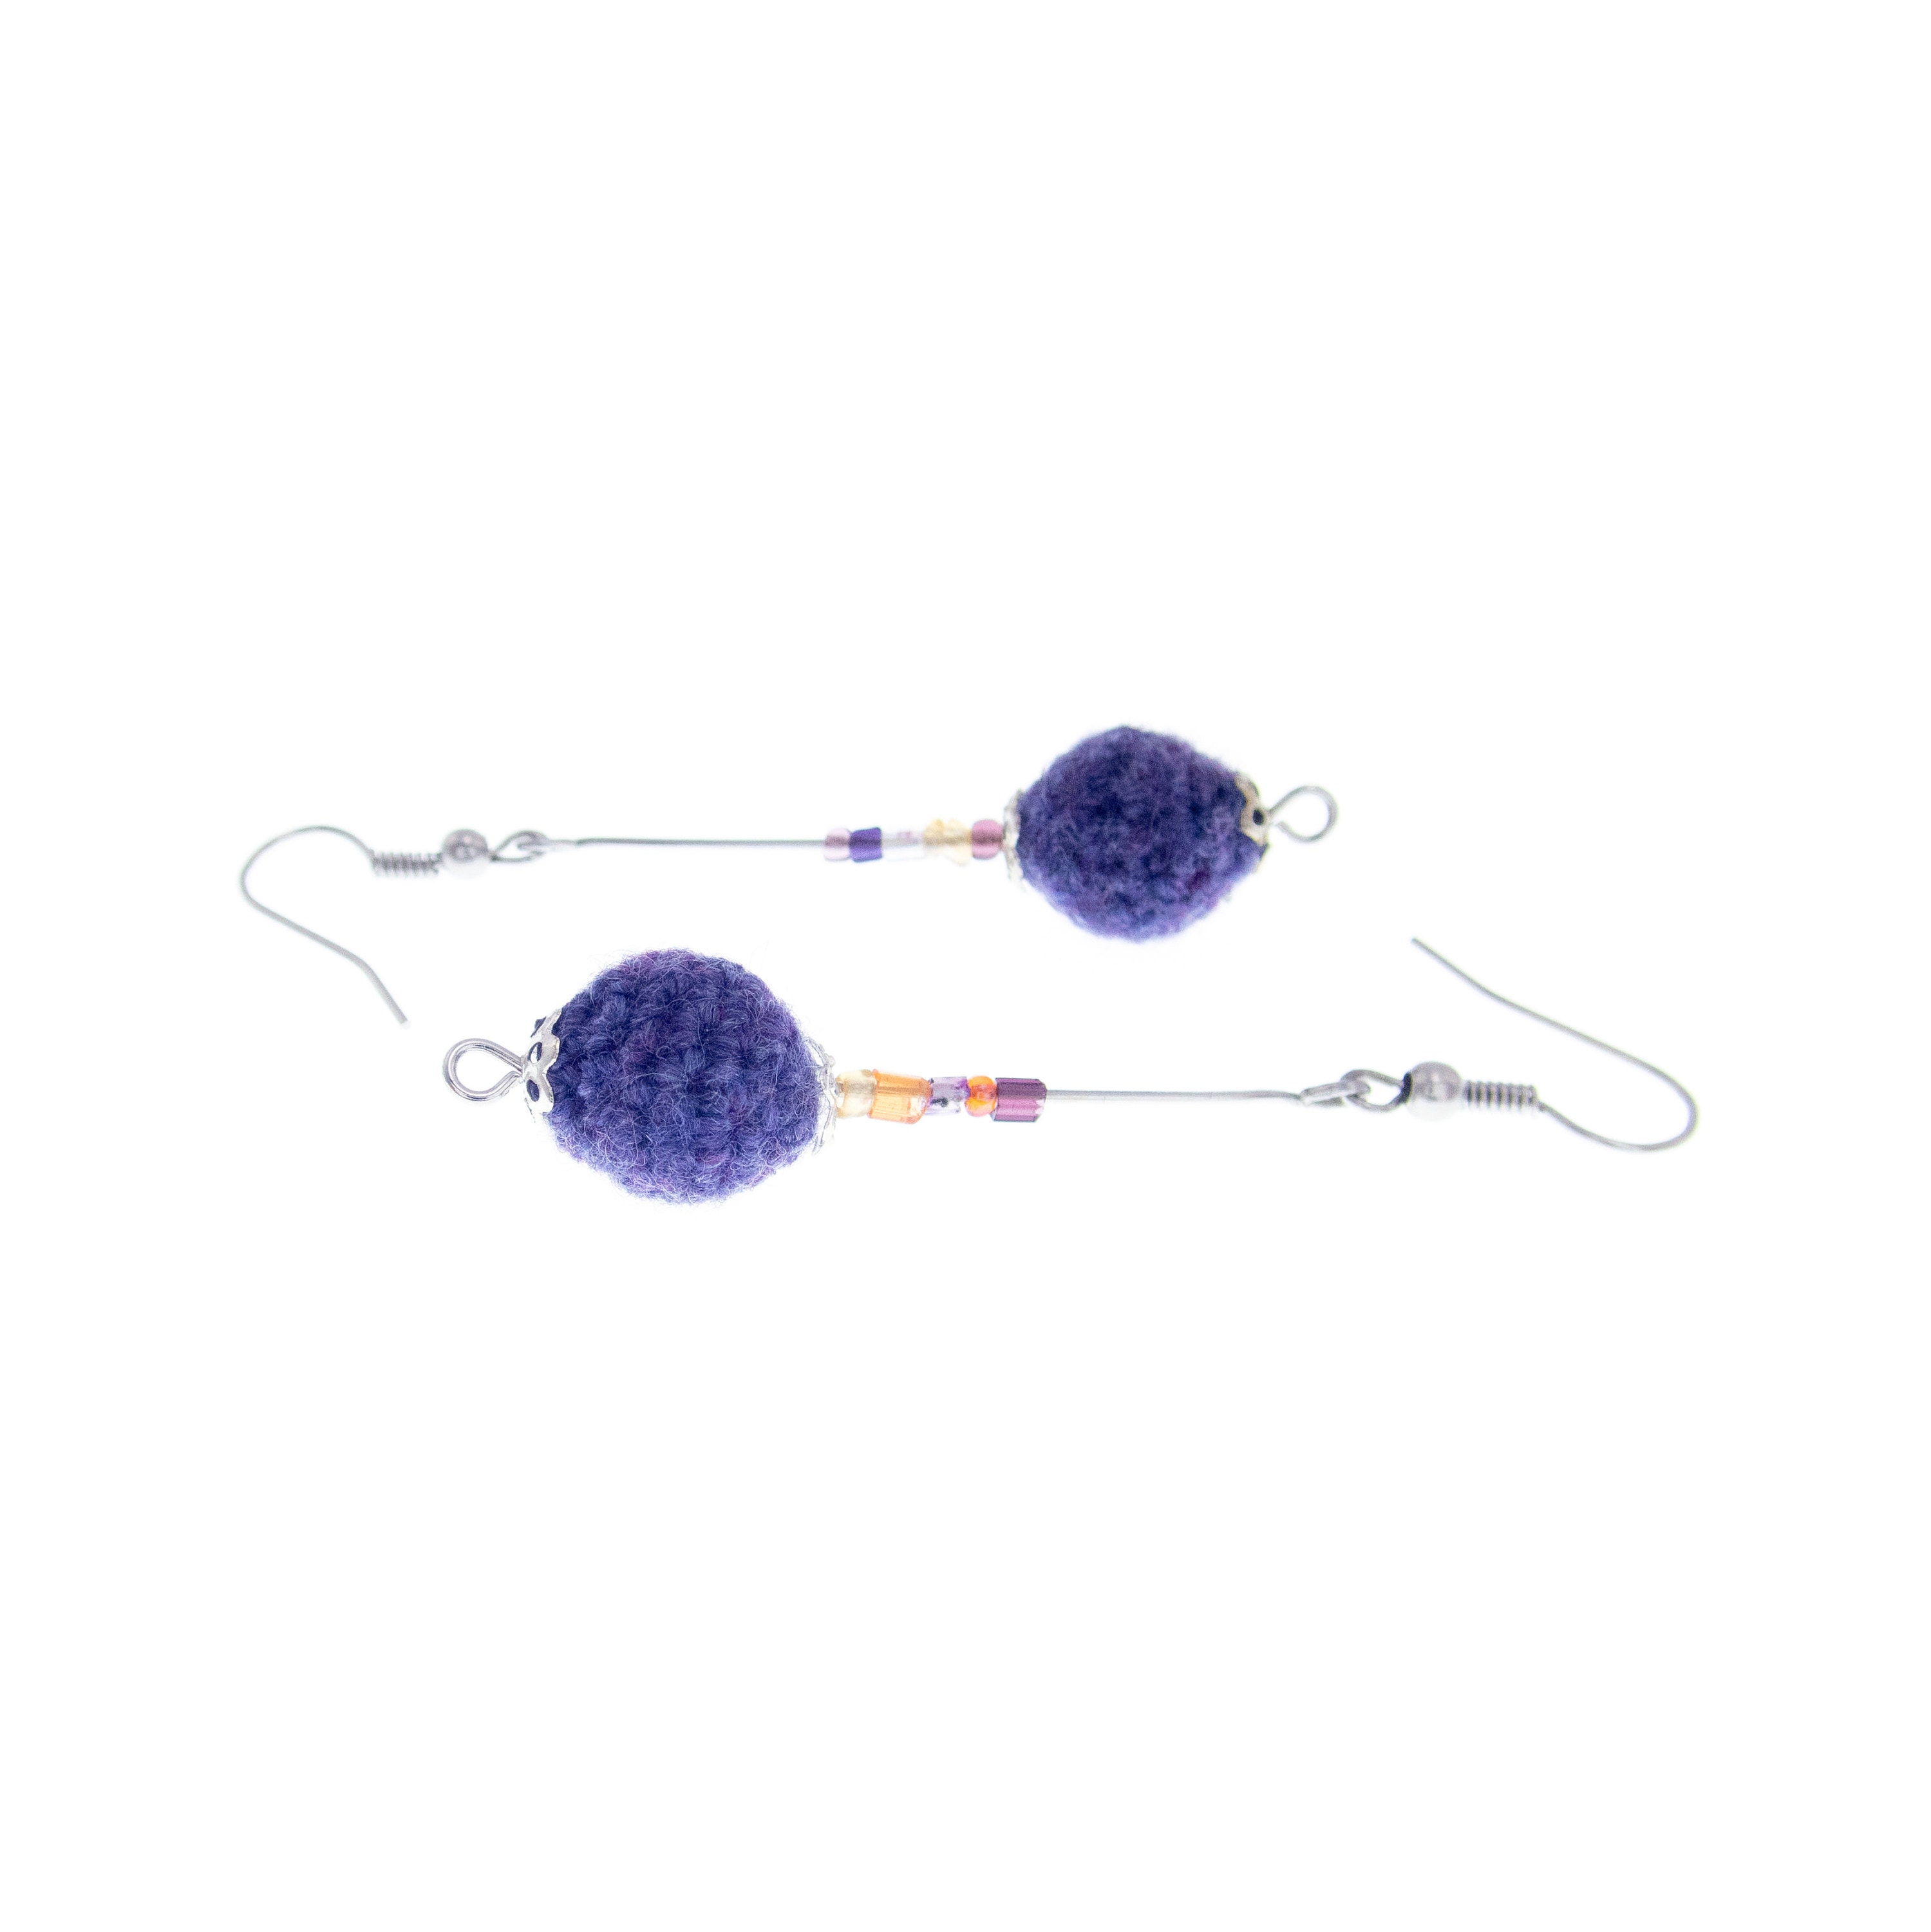 handmade statement earrings dangle with knitted purple balls